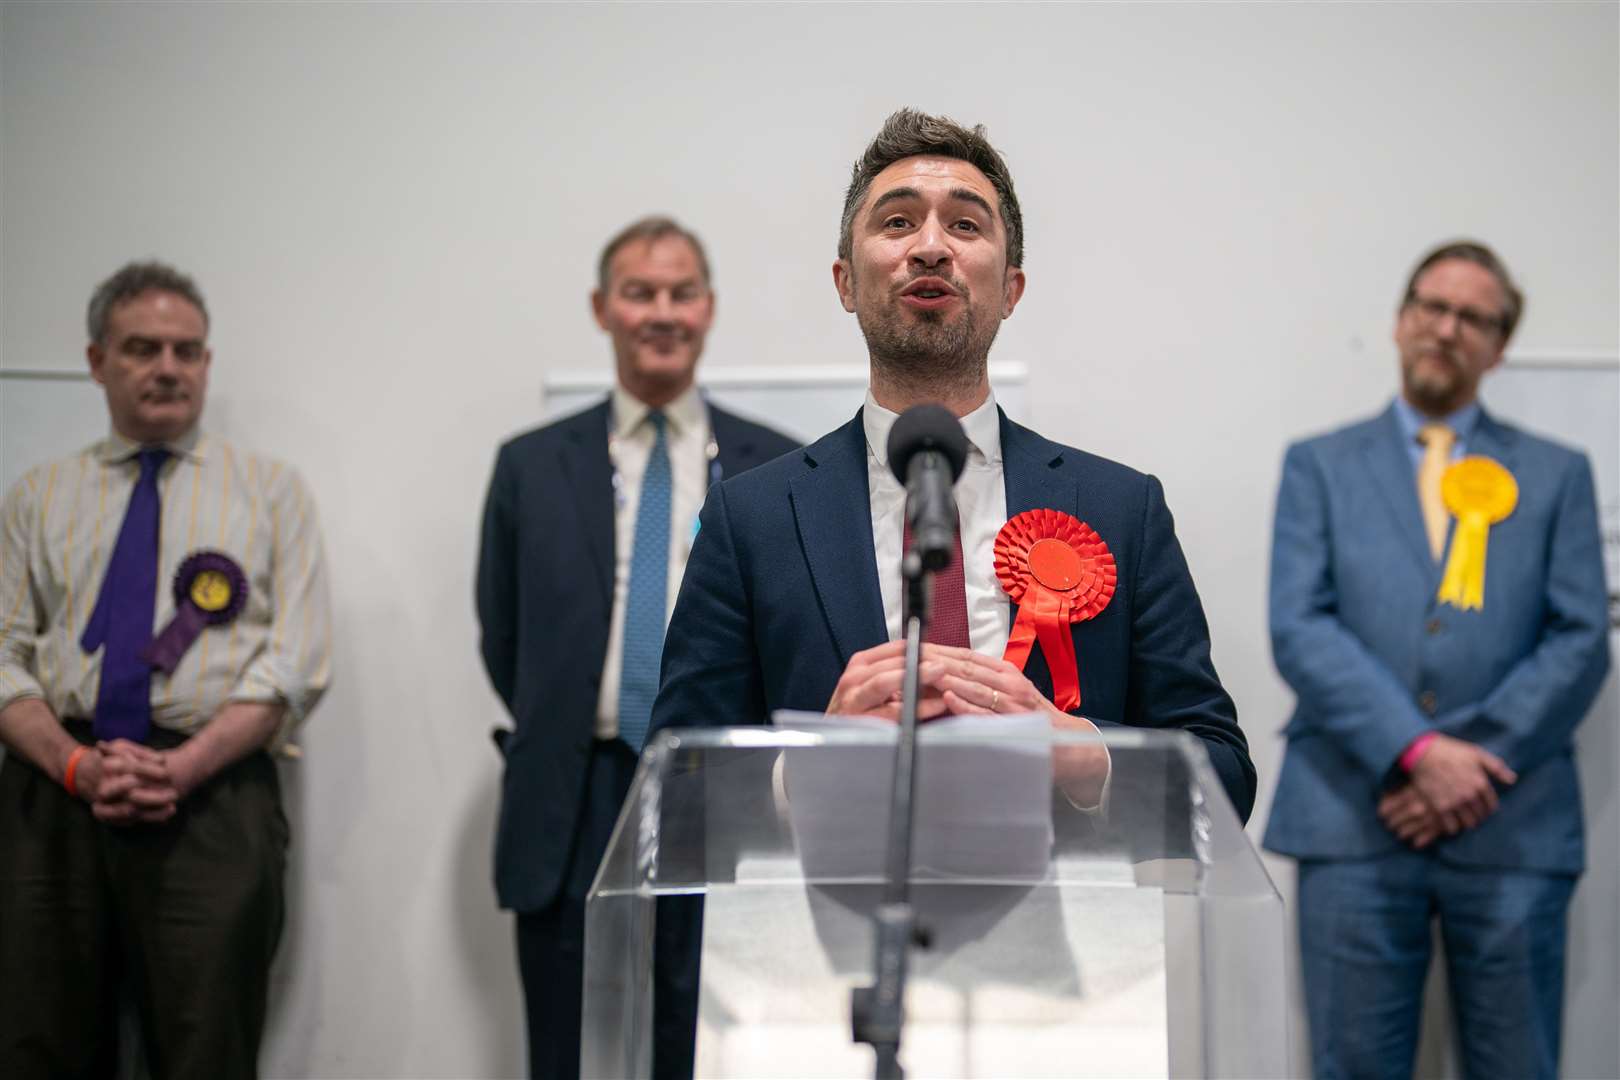 Labour’s Damien Egan said the Conservatives had ‘sucked the hope out of our country’ (Ben Birchall/PA)